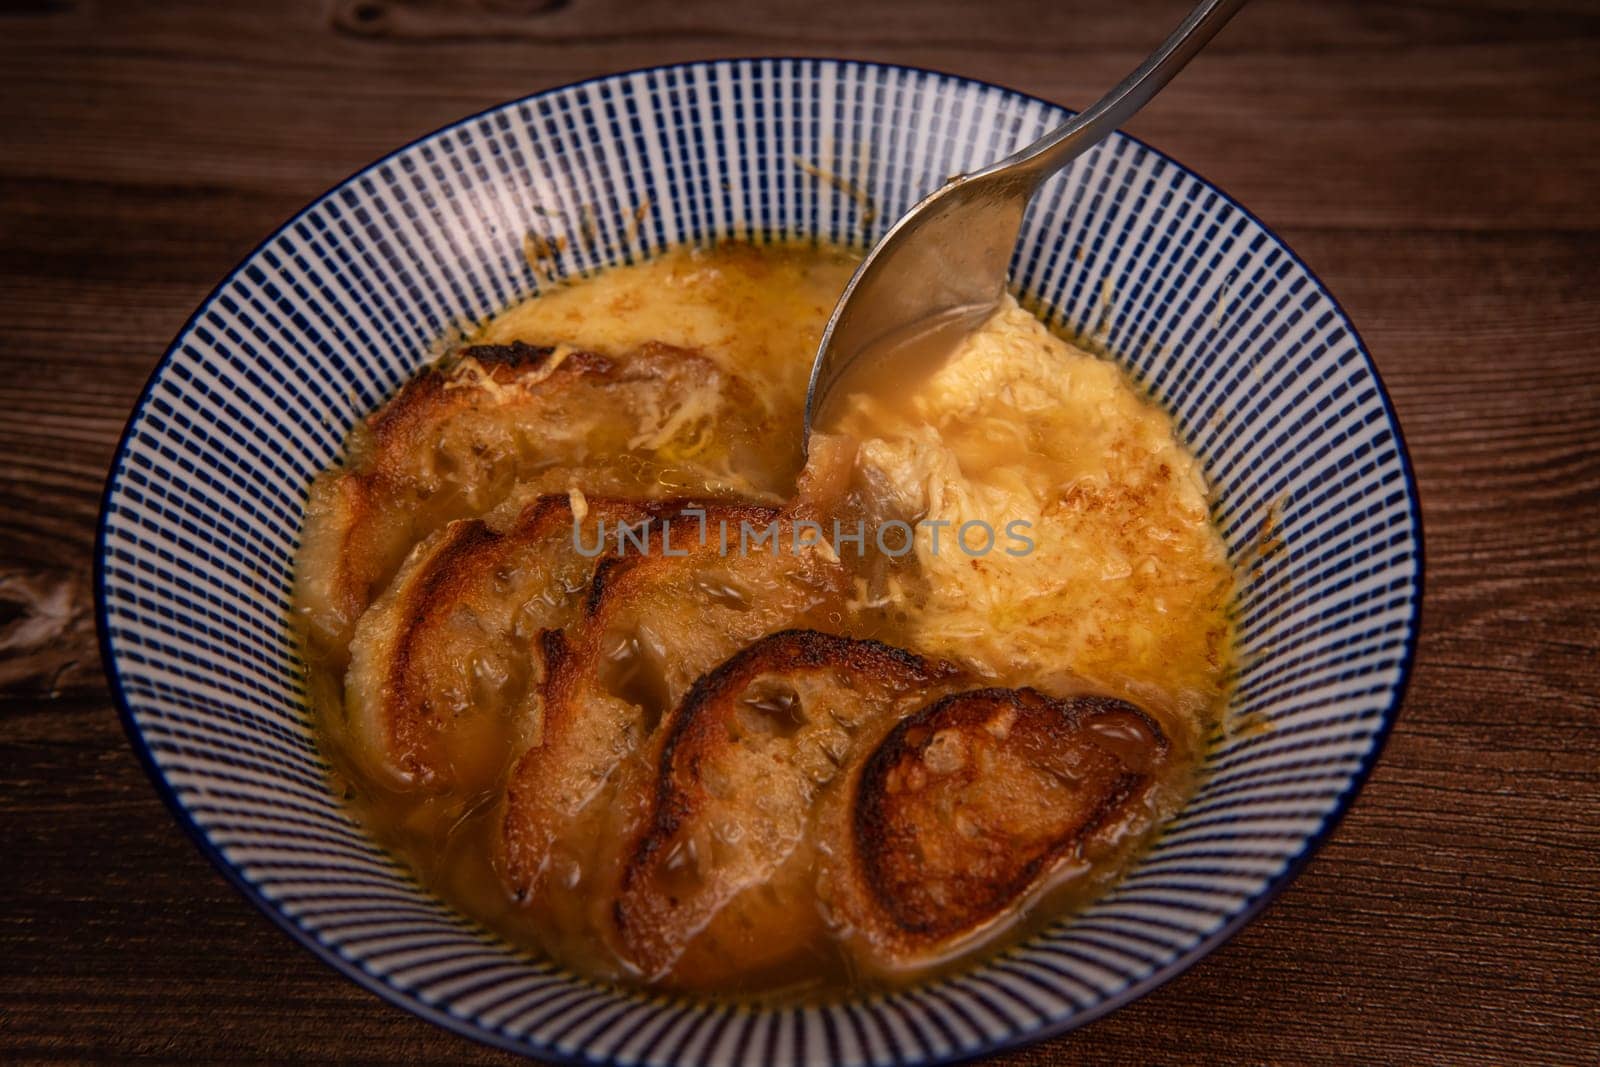 Classic French onion soup baked with cheese croutons sprinkled with fresh thyme, close up view. by FreeProd